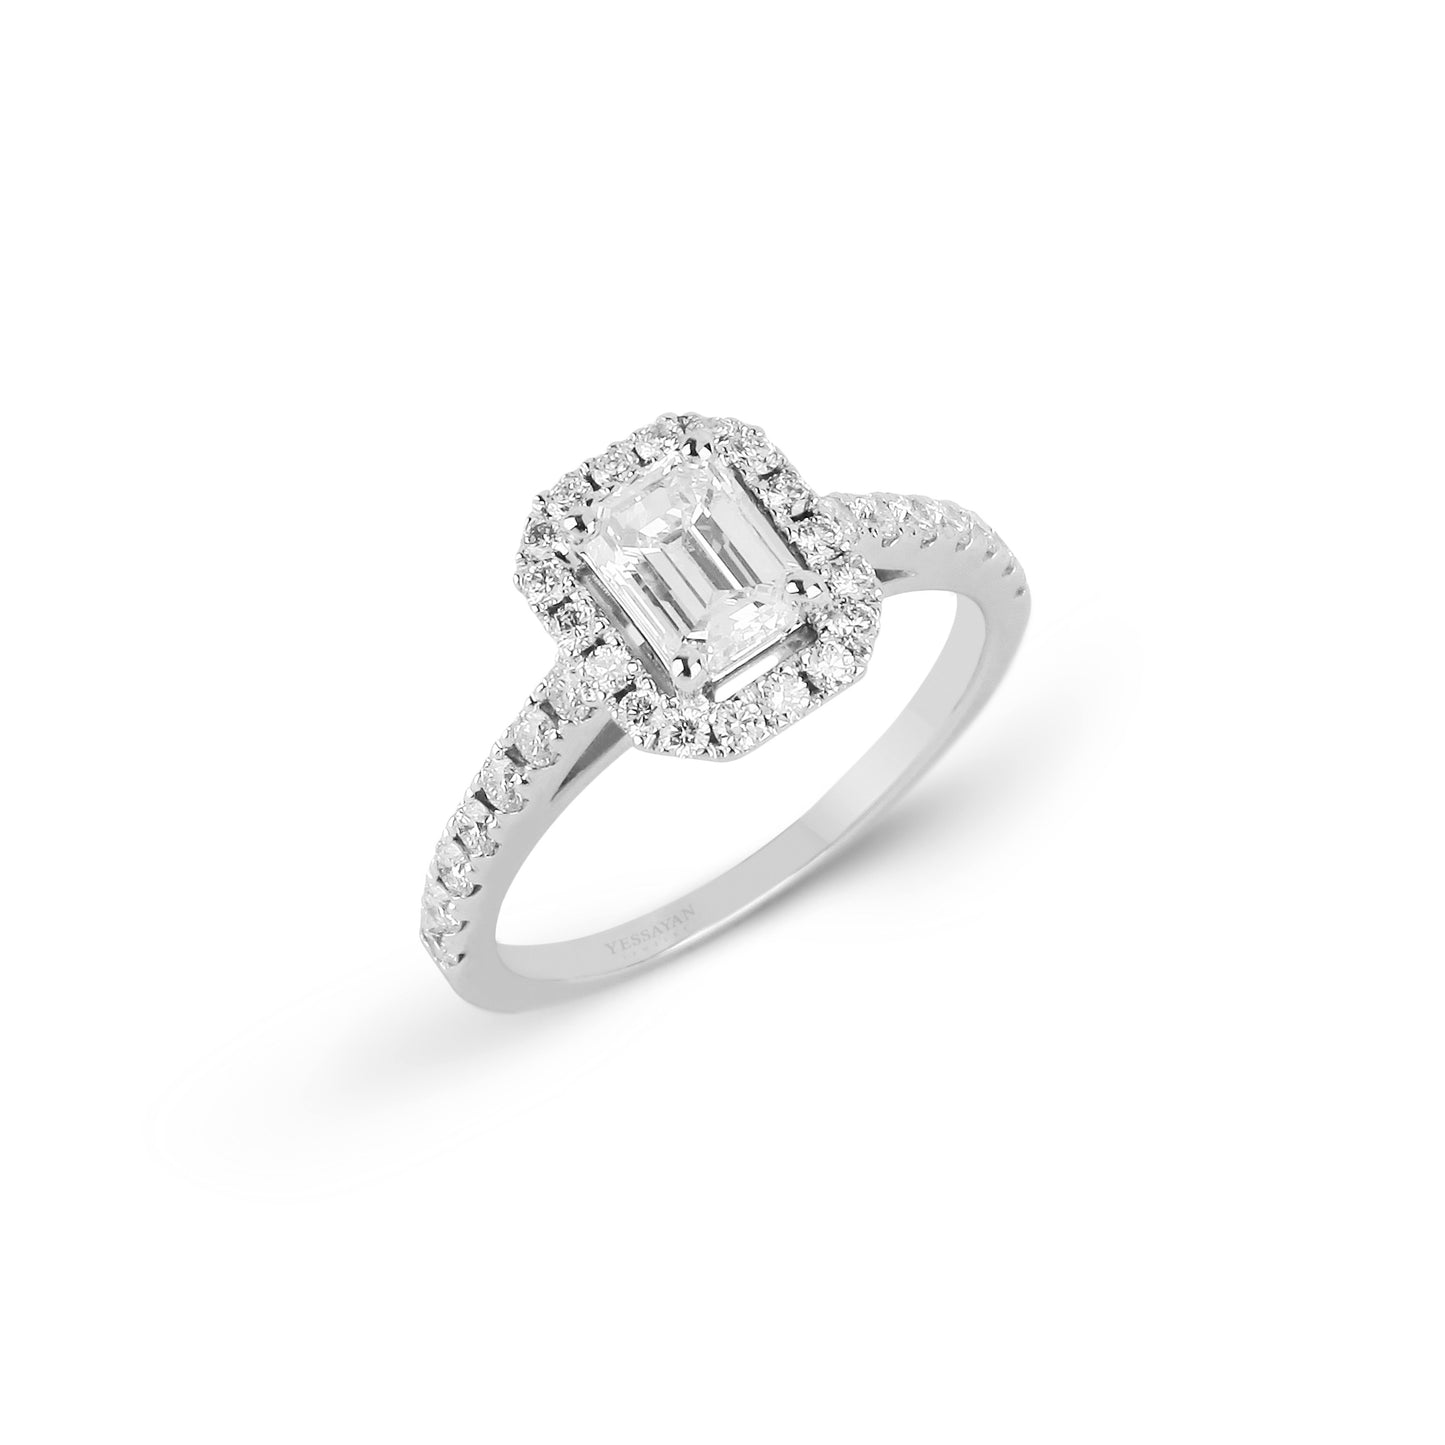 Certified Framed Solitaire Diamond Ring | jewelry online store | diamond rings